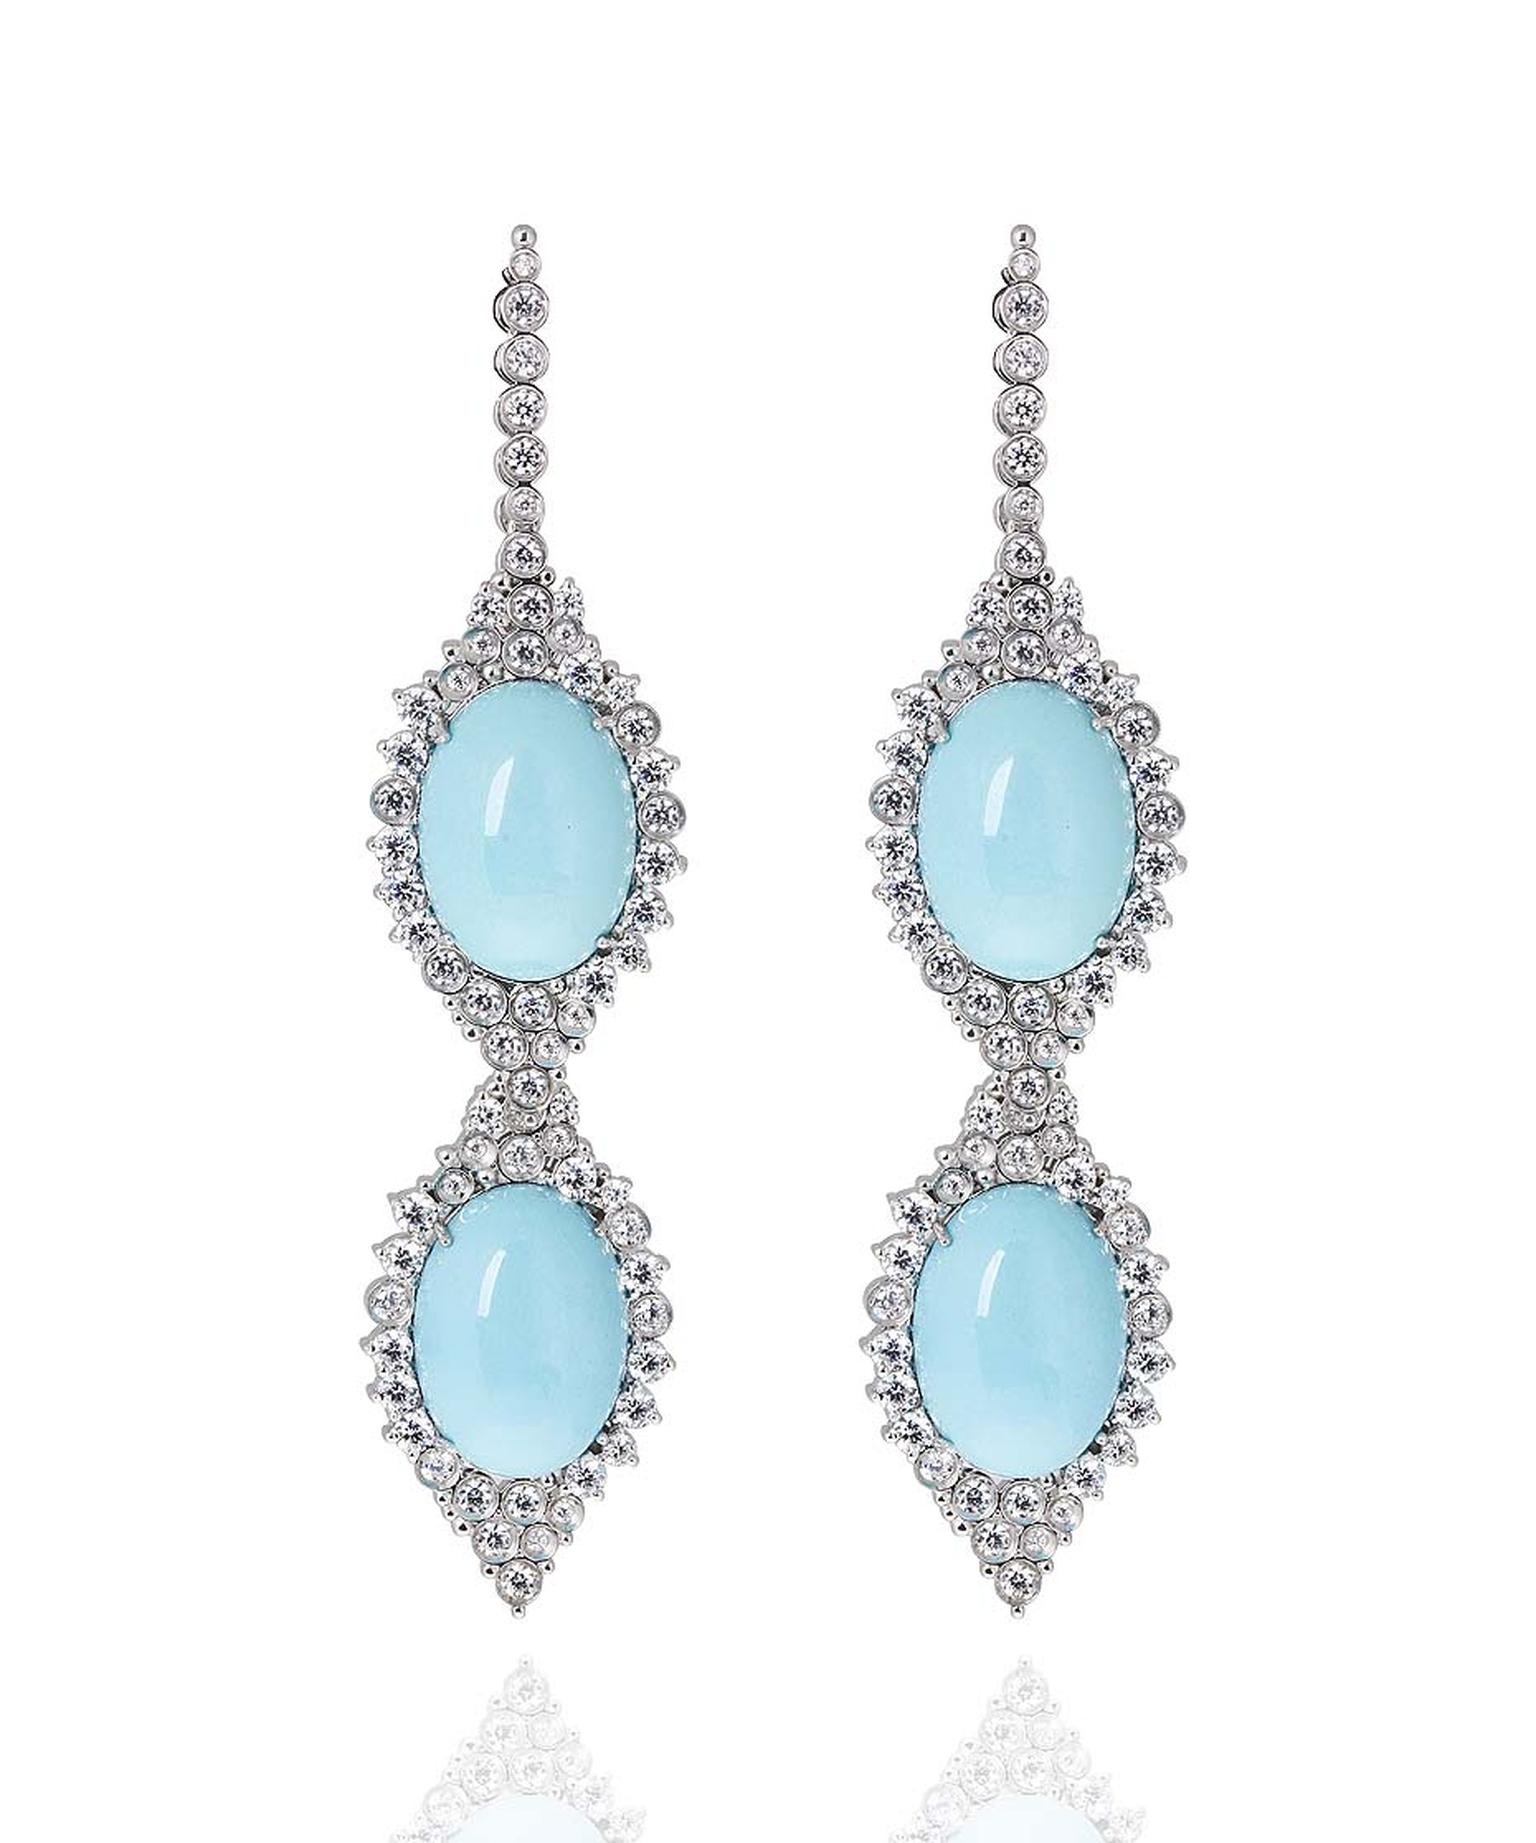 Carla Amorim earrings set with rare Sleeping Beauty turquoise in white gold, accentuated by brilliant-cut diamonds.